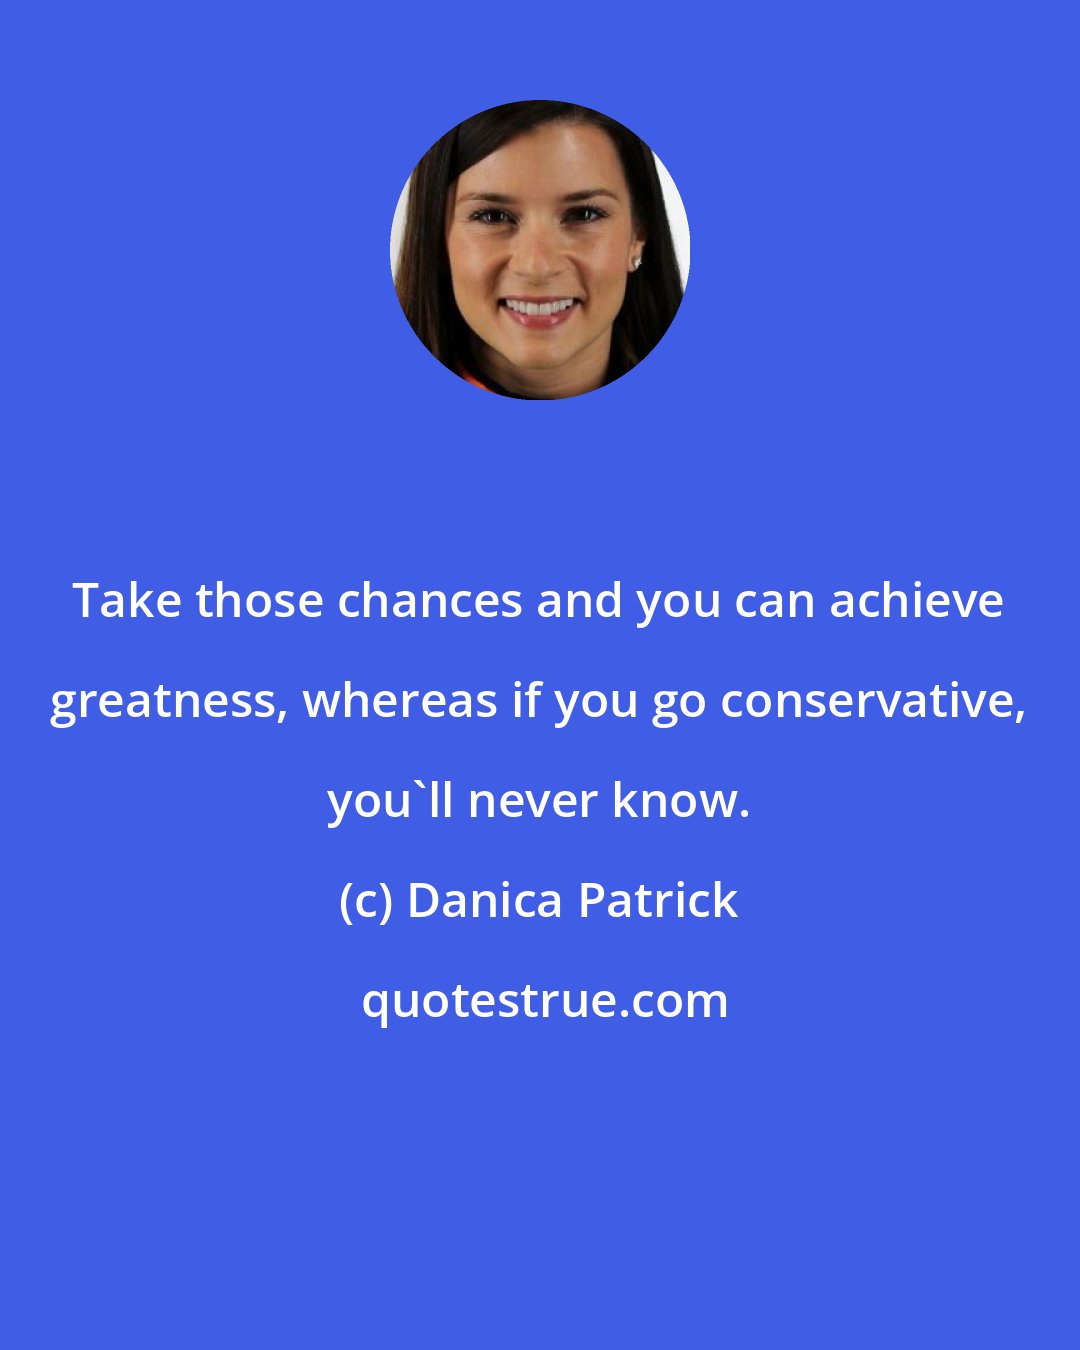 Danica Patrick: Take those chances and you can achieve greatness, whereas if you go conservative, you'll never know.